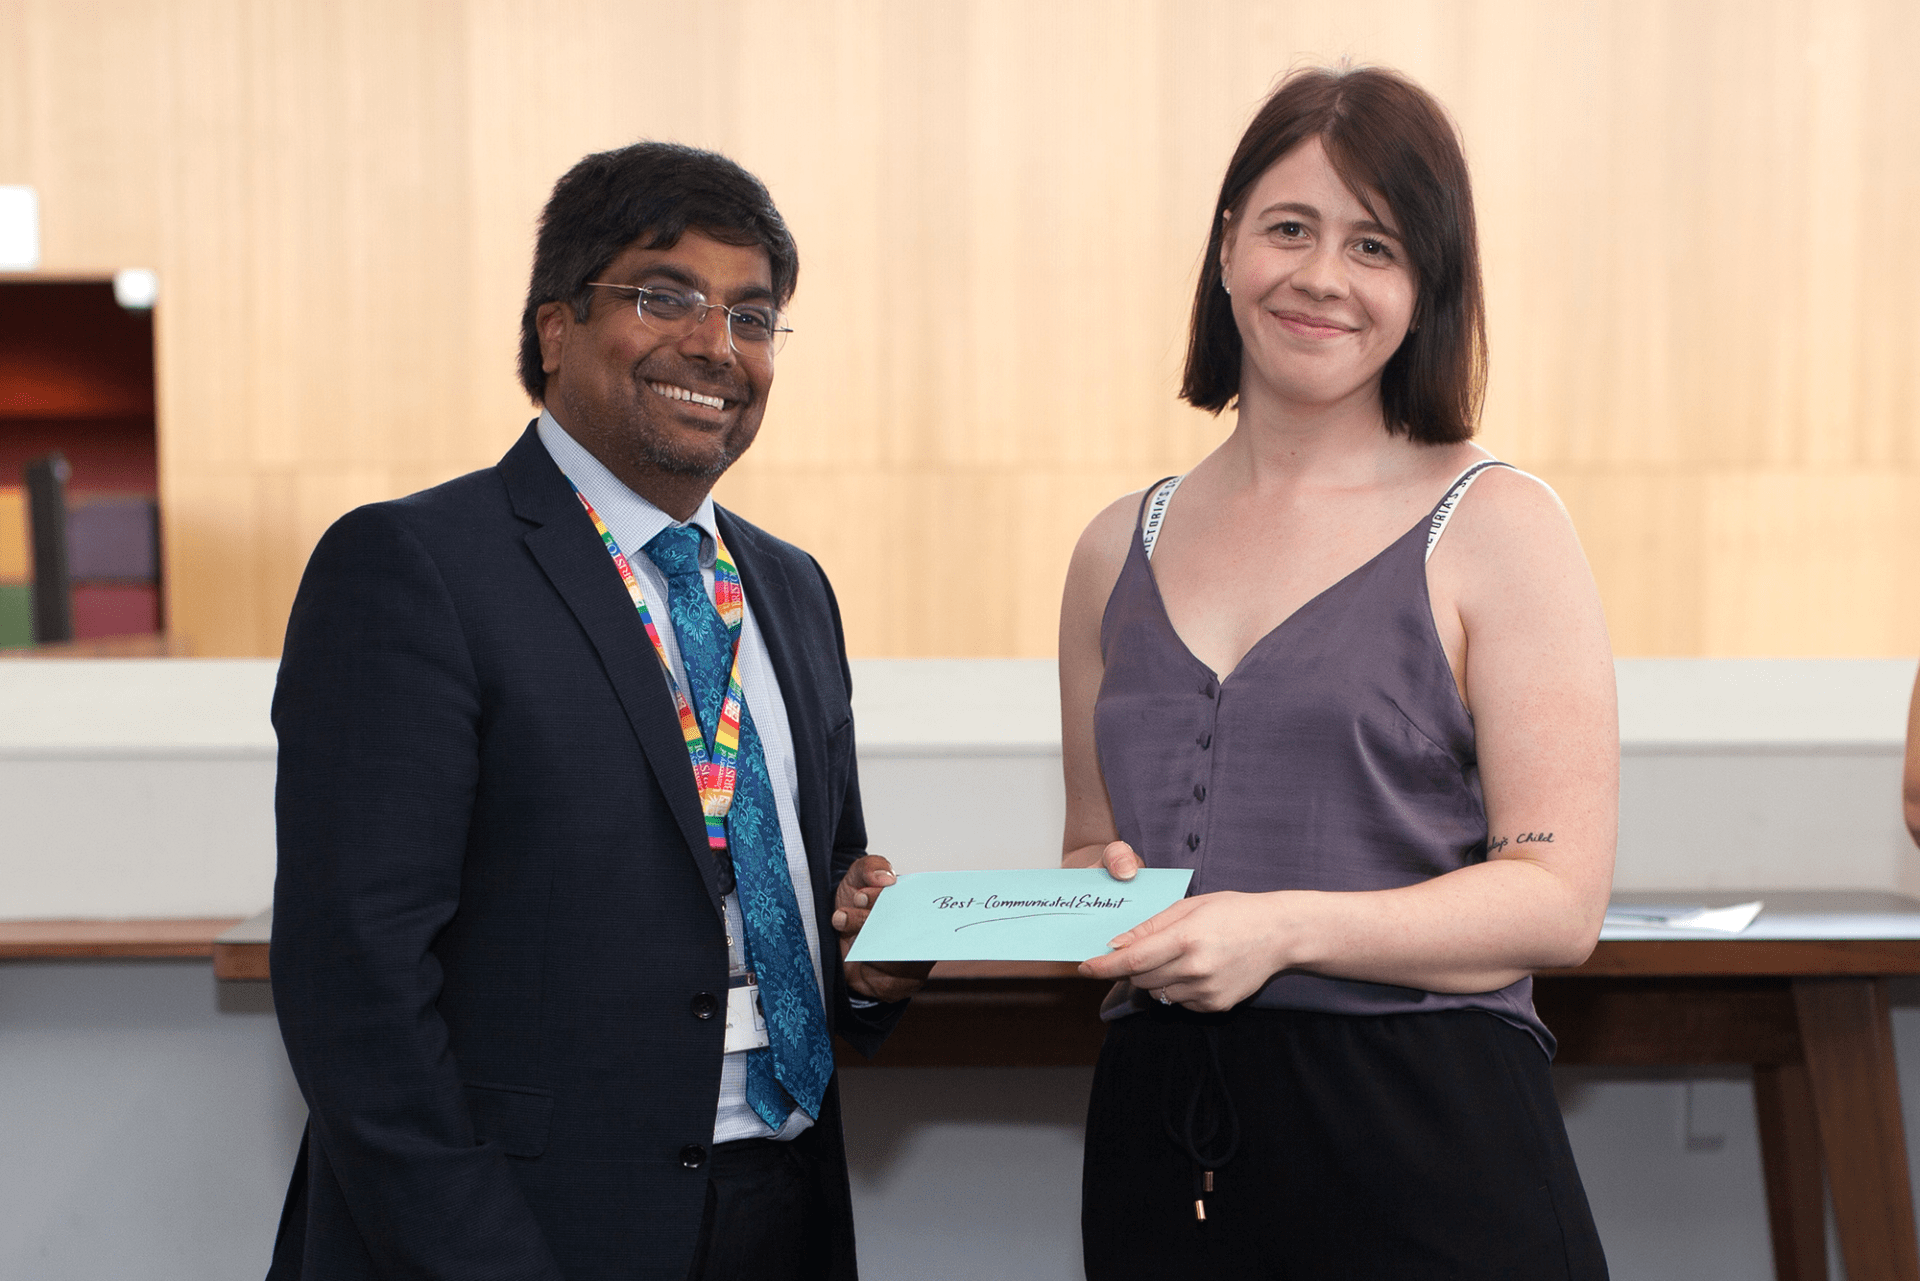 Professor Nishan Canagarajah presenting Laura Fox with the 'Best-Communicated Exhibit' prize